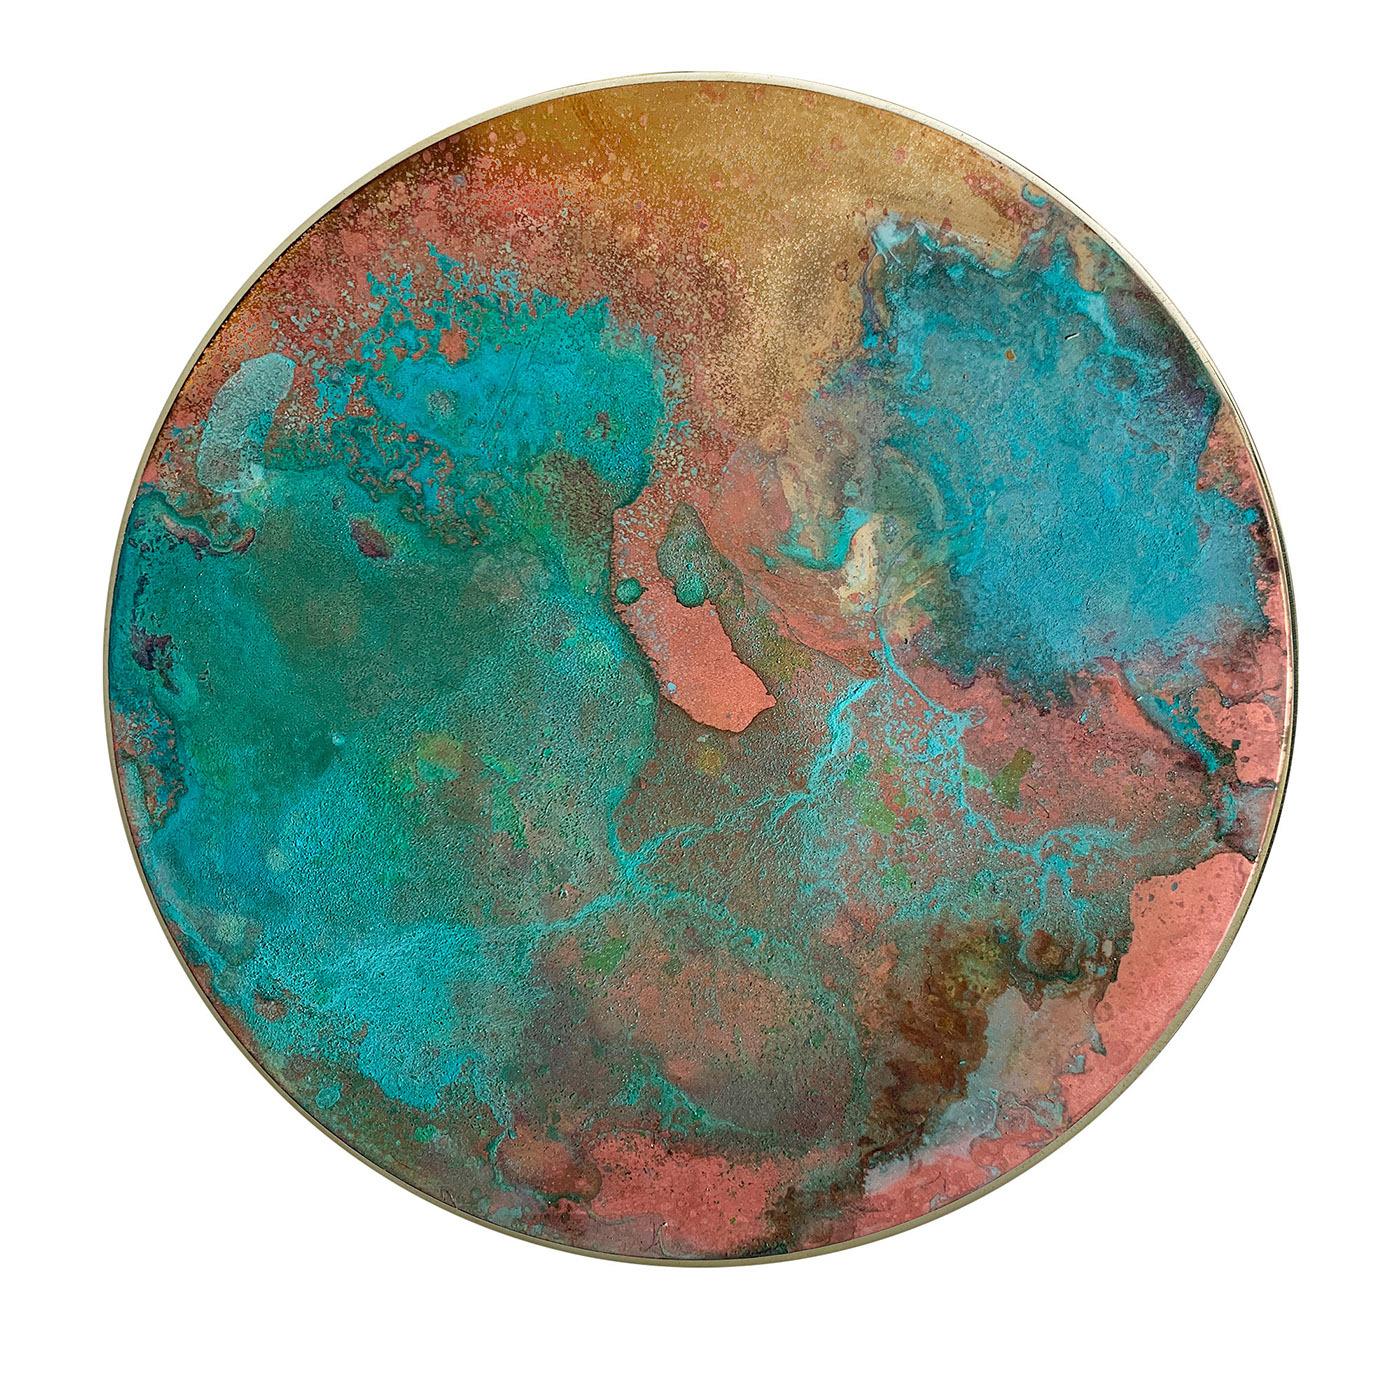 The breathtaking traceries and shades recalling romantic sunrises adorn this singular decorative disk. Deftly handcrafted of brass with applied oxides, it will accent any contemporary home with its aesthetic of extraordinary evocative value. Signed